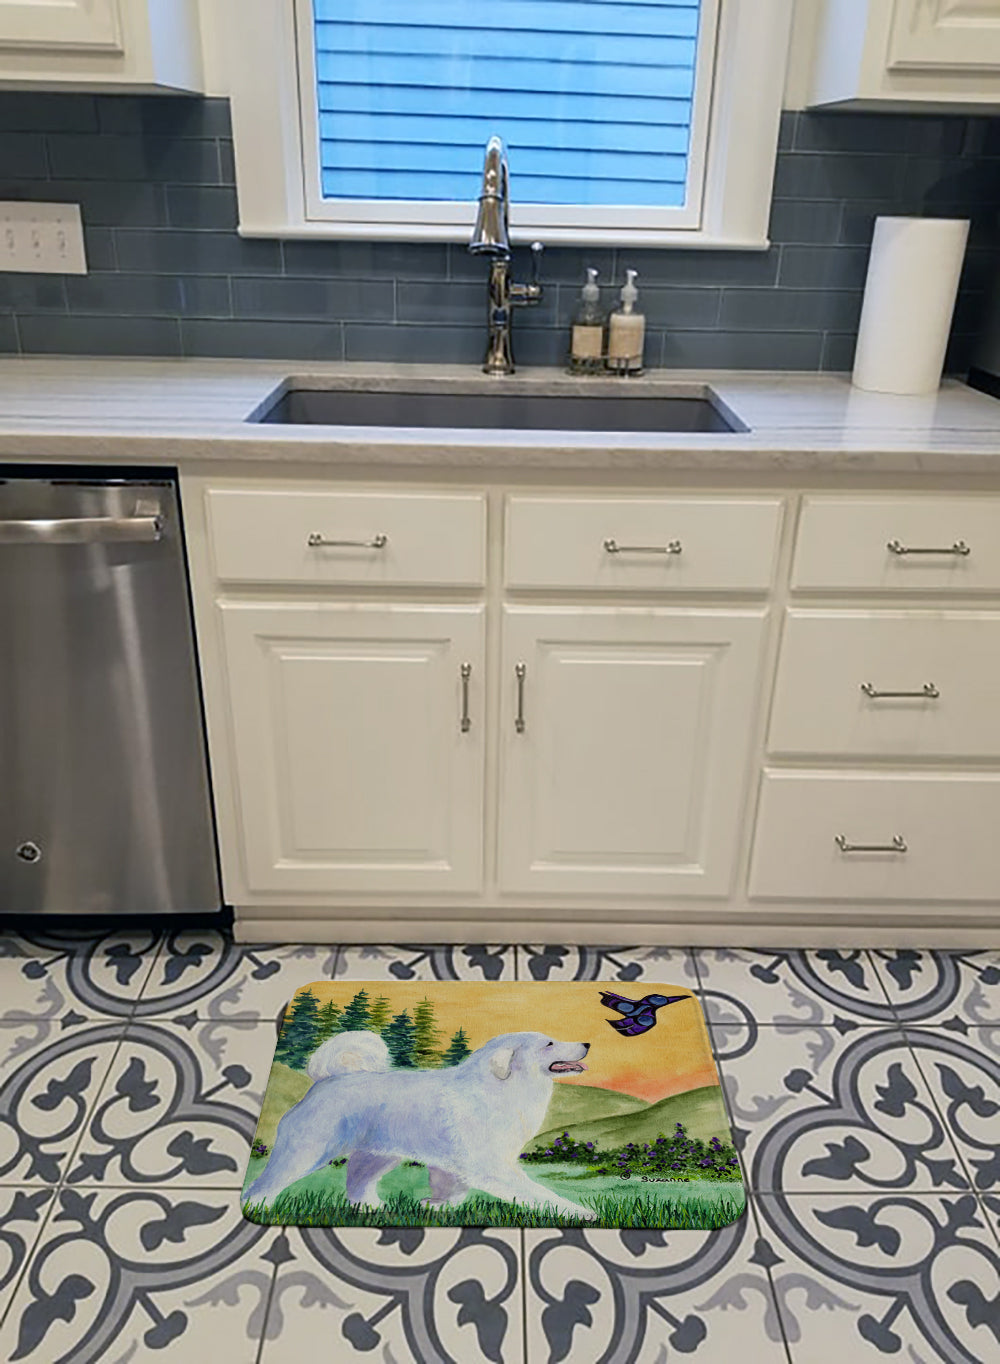 Great Pyrenees Machine Washable Memory Foam Mat SS8241RUG - the-store.com